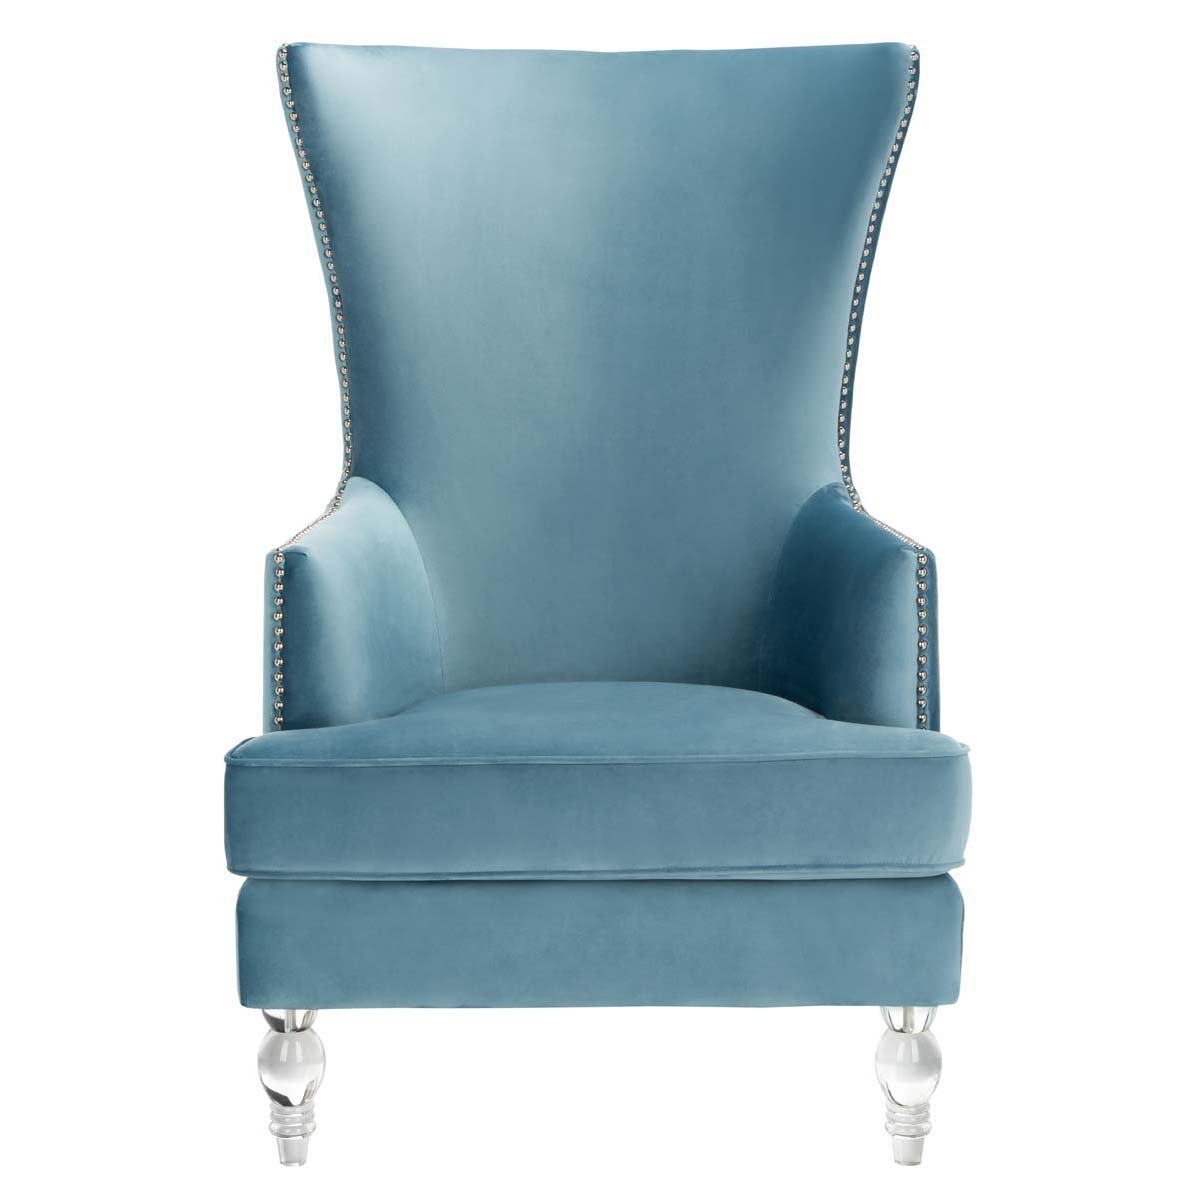 Safavieh Couture Geode Modern Wingback Chair